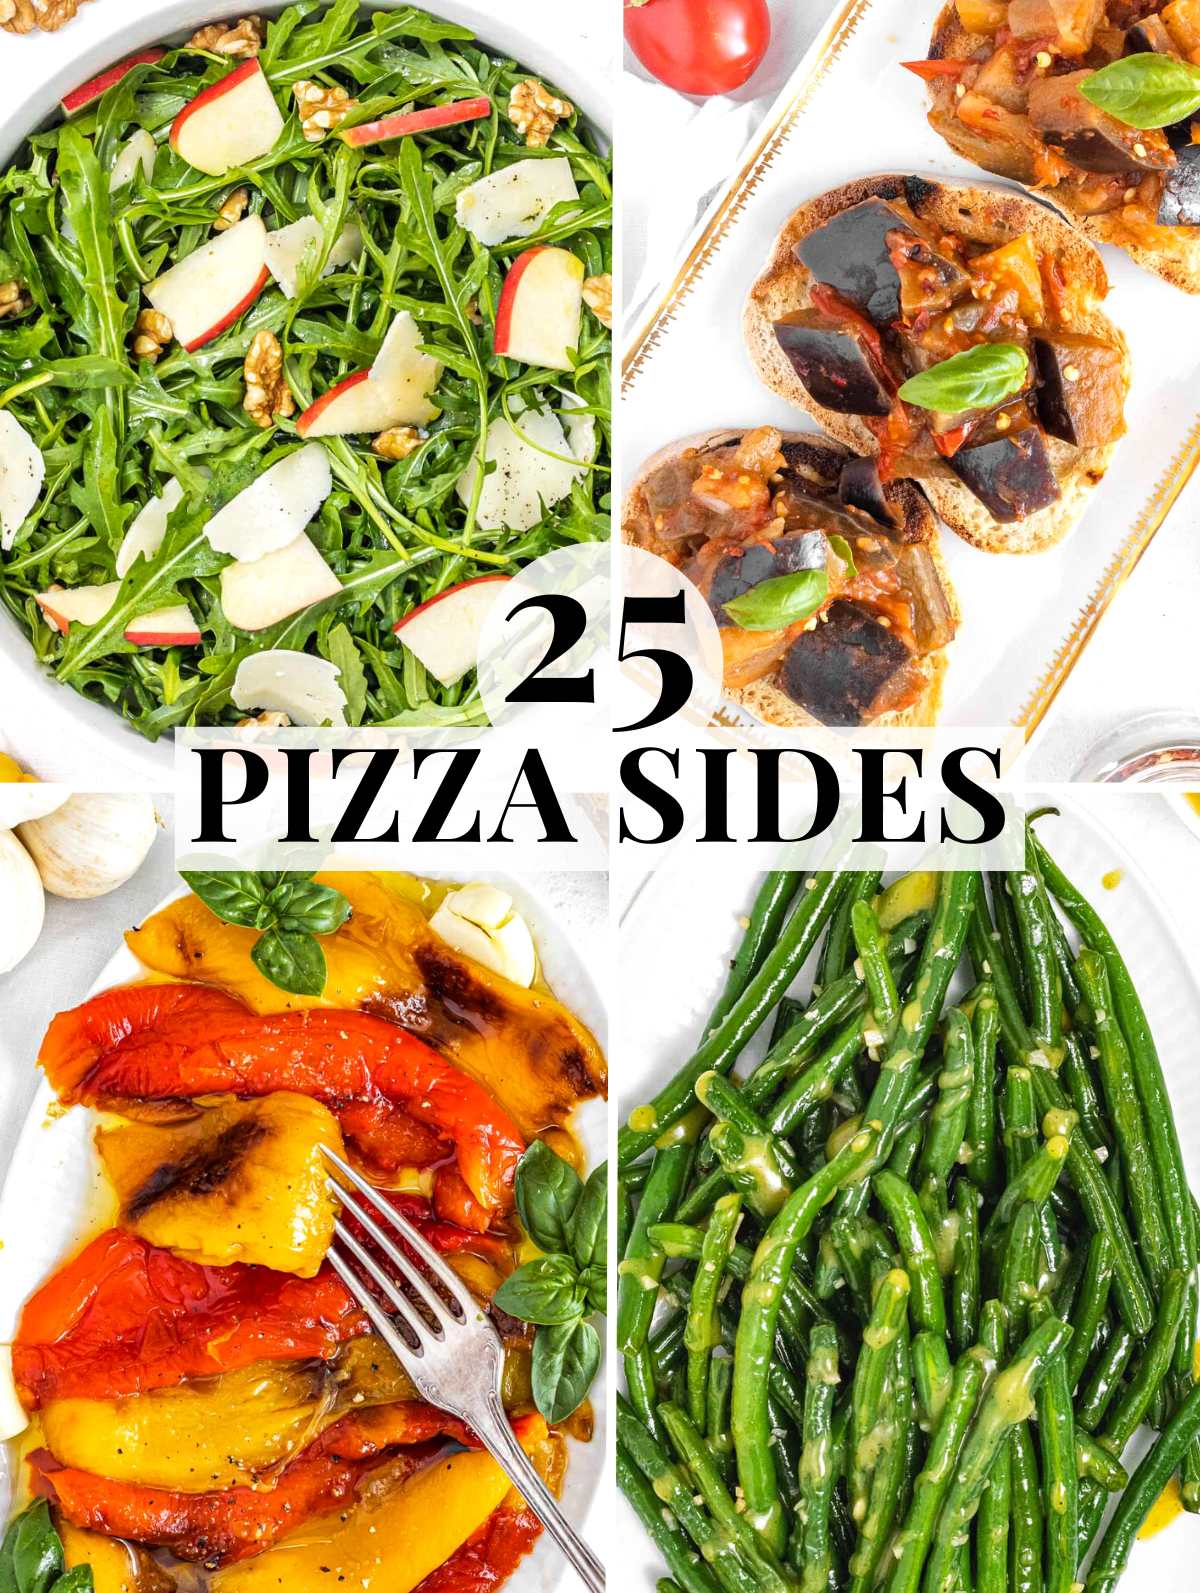 Sides for pizza